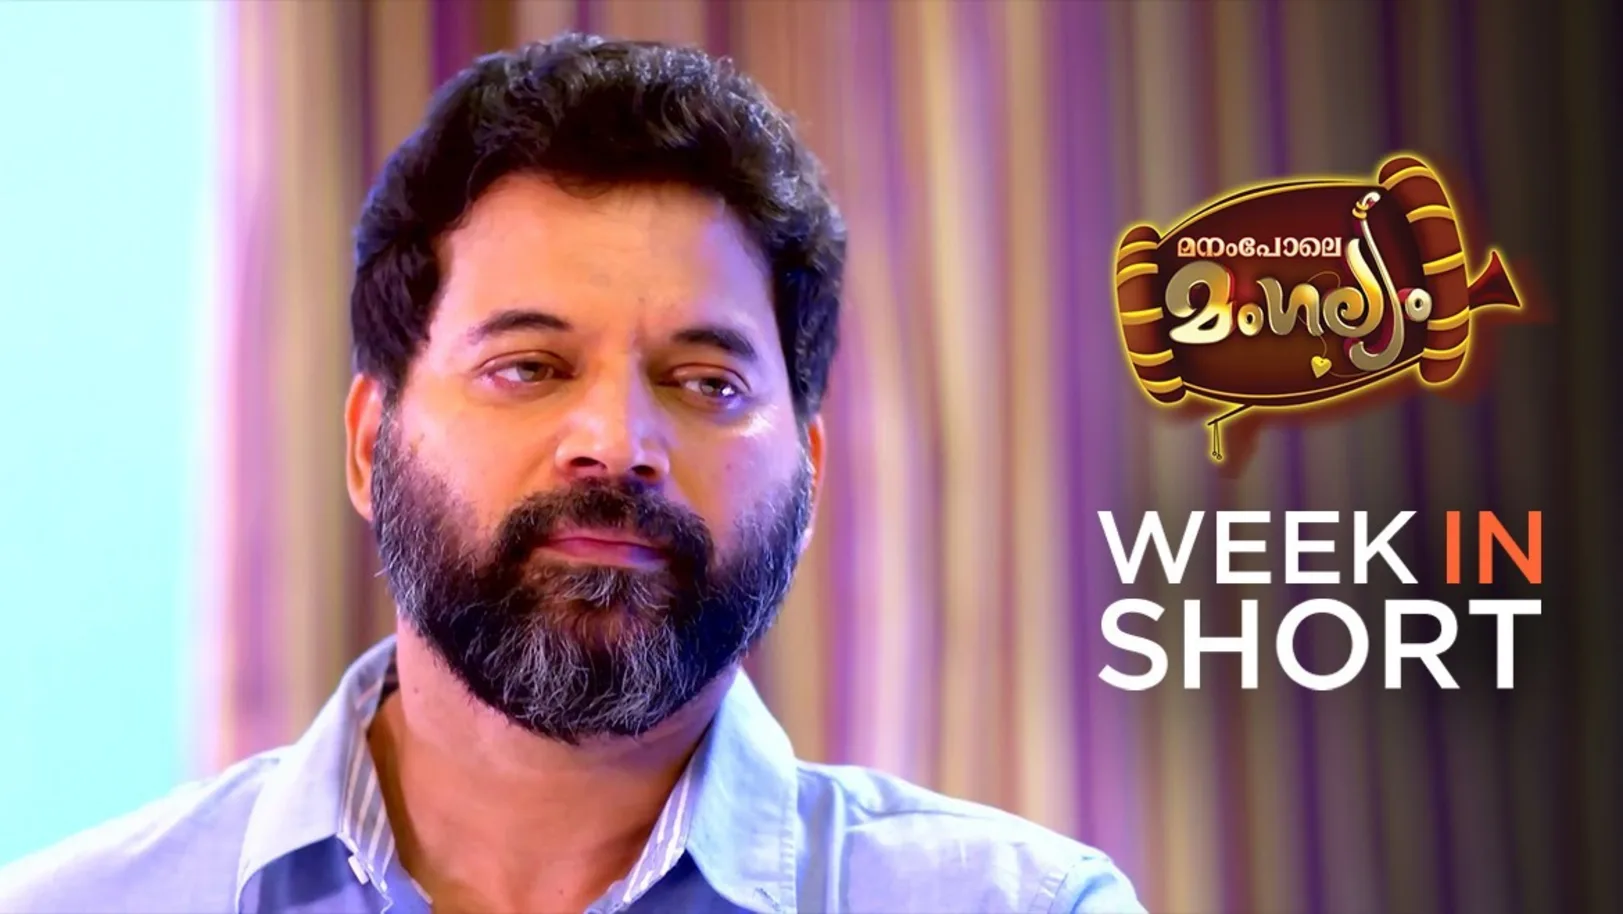 Week in Short - Manampole Mangalyam - 08 March to 13 March 2021 14th March 2021 Webisode